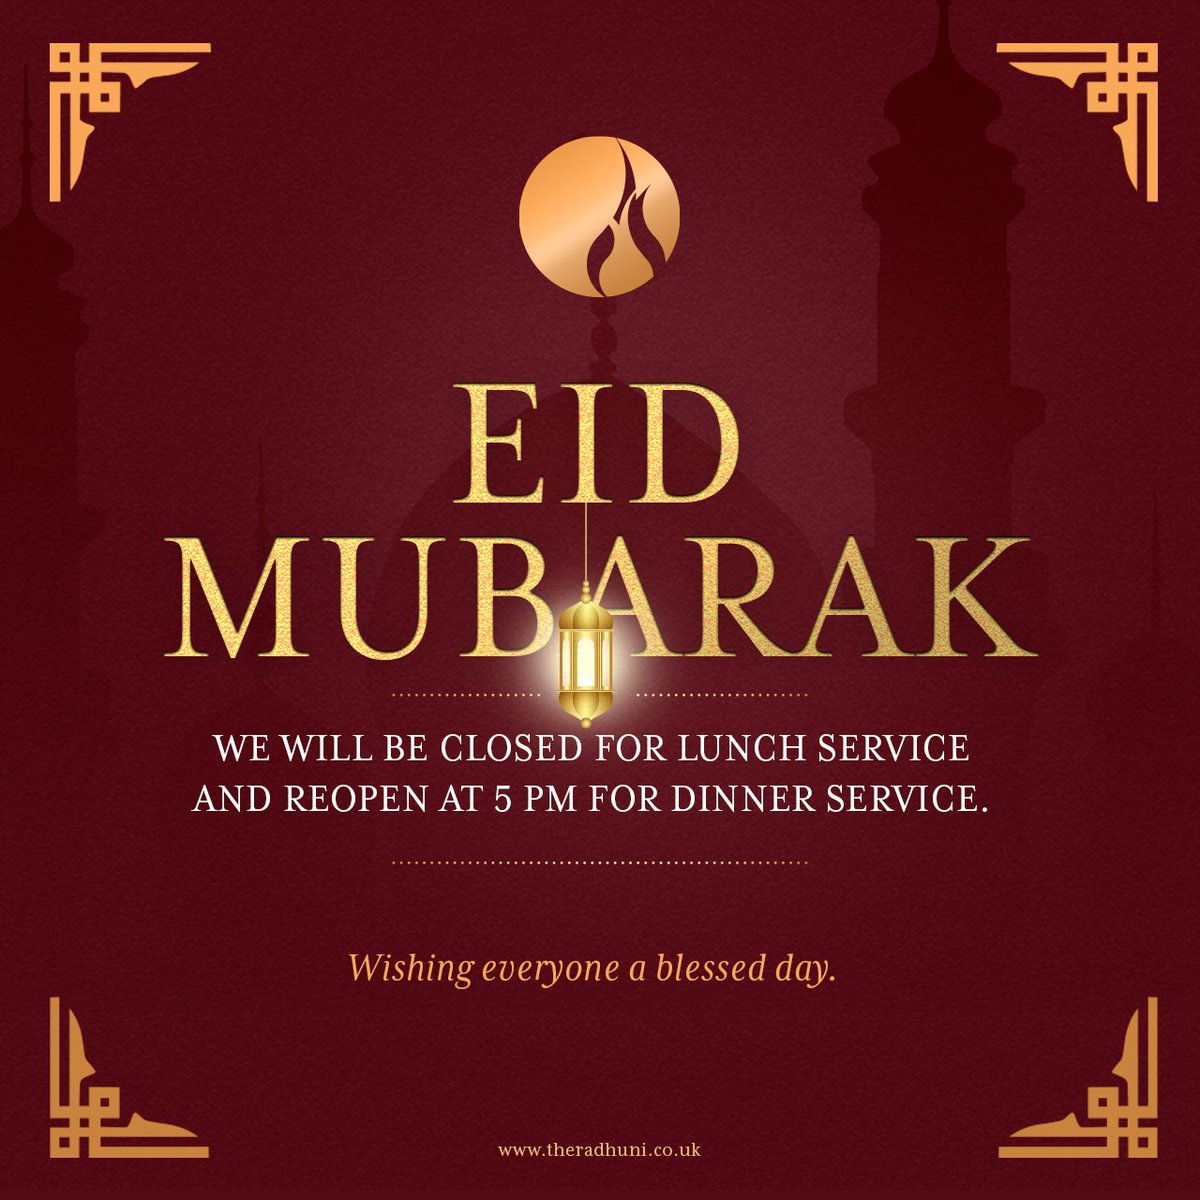 🌜Eid Mubarak!🌜 A reminder that we will be closed for lunch today. However, we are excited to welcome you back for our dinner service starting at 5pm this evening!